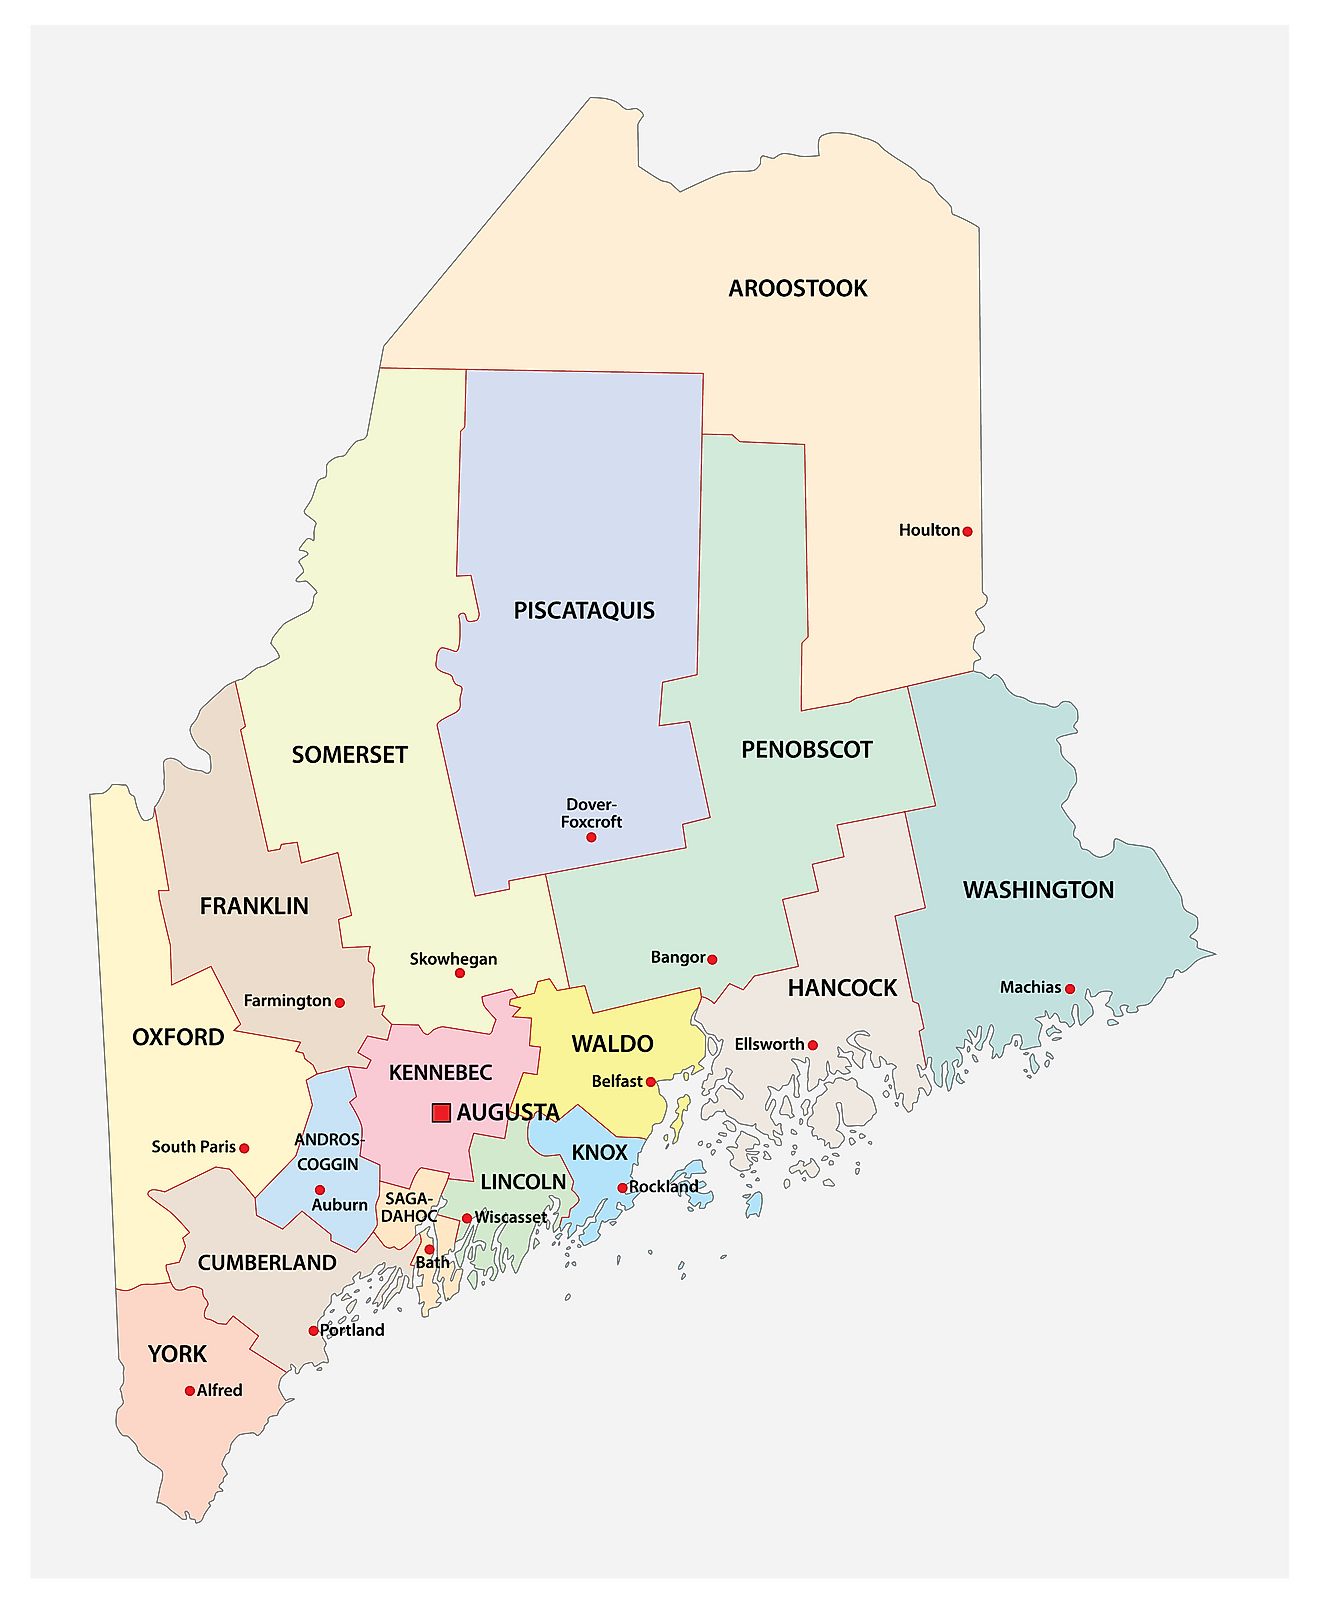 Administrative Map of Maine showing its 16 counties and the capital city - Augusta